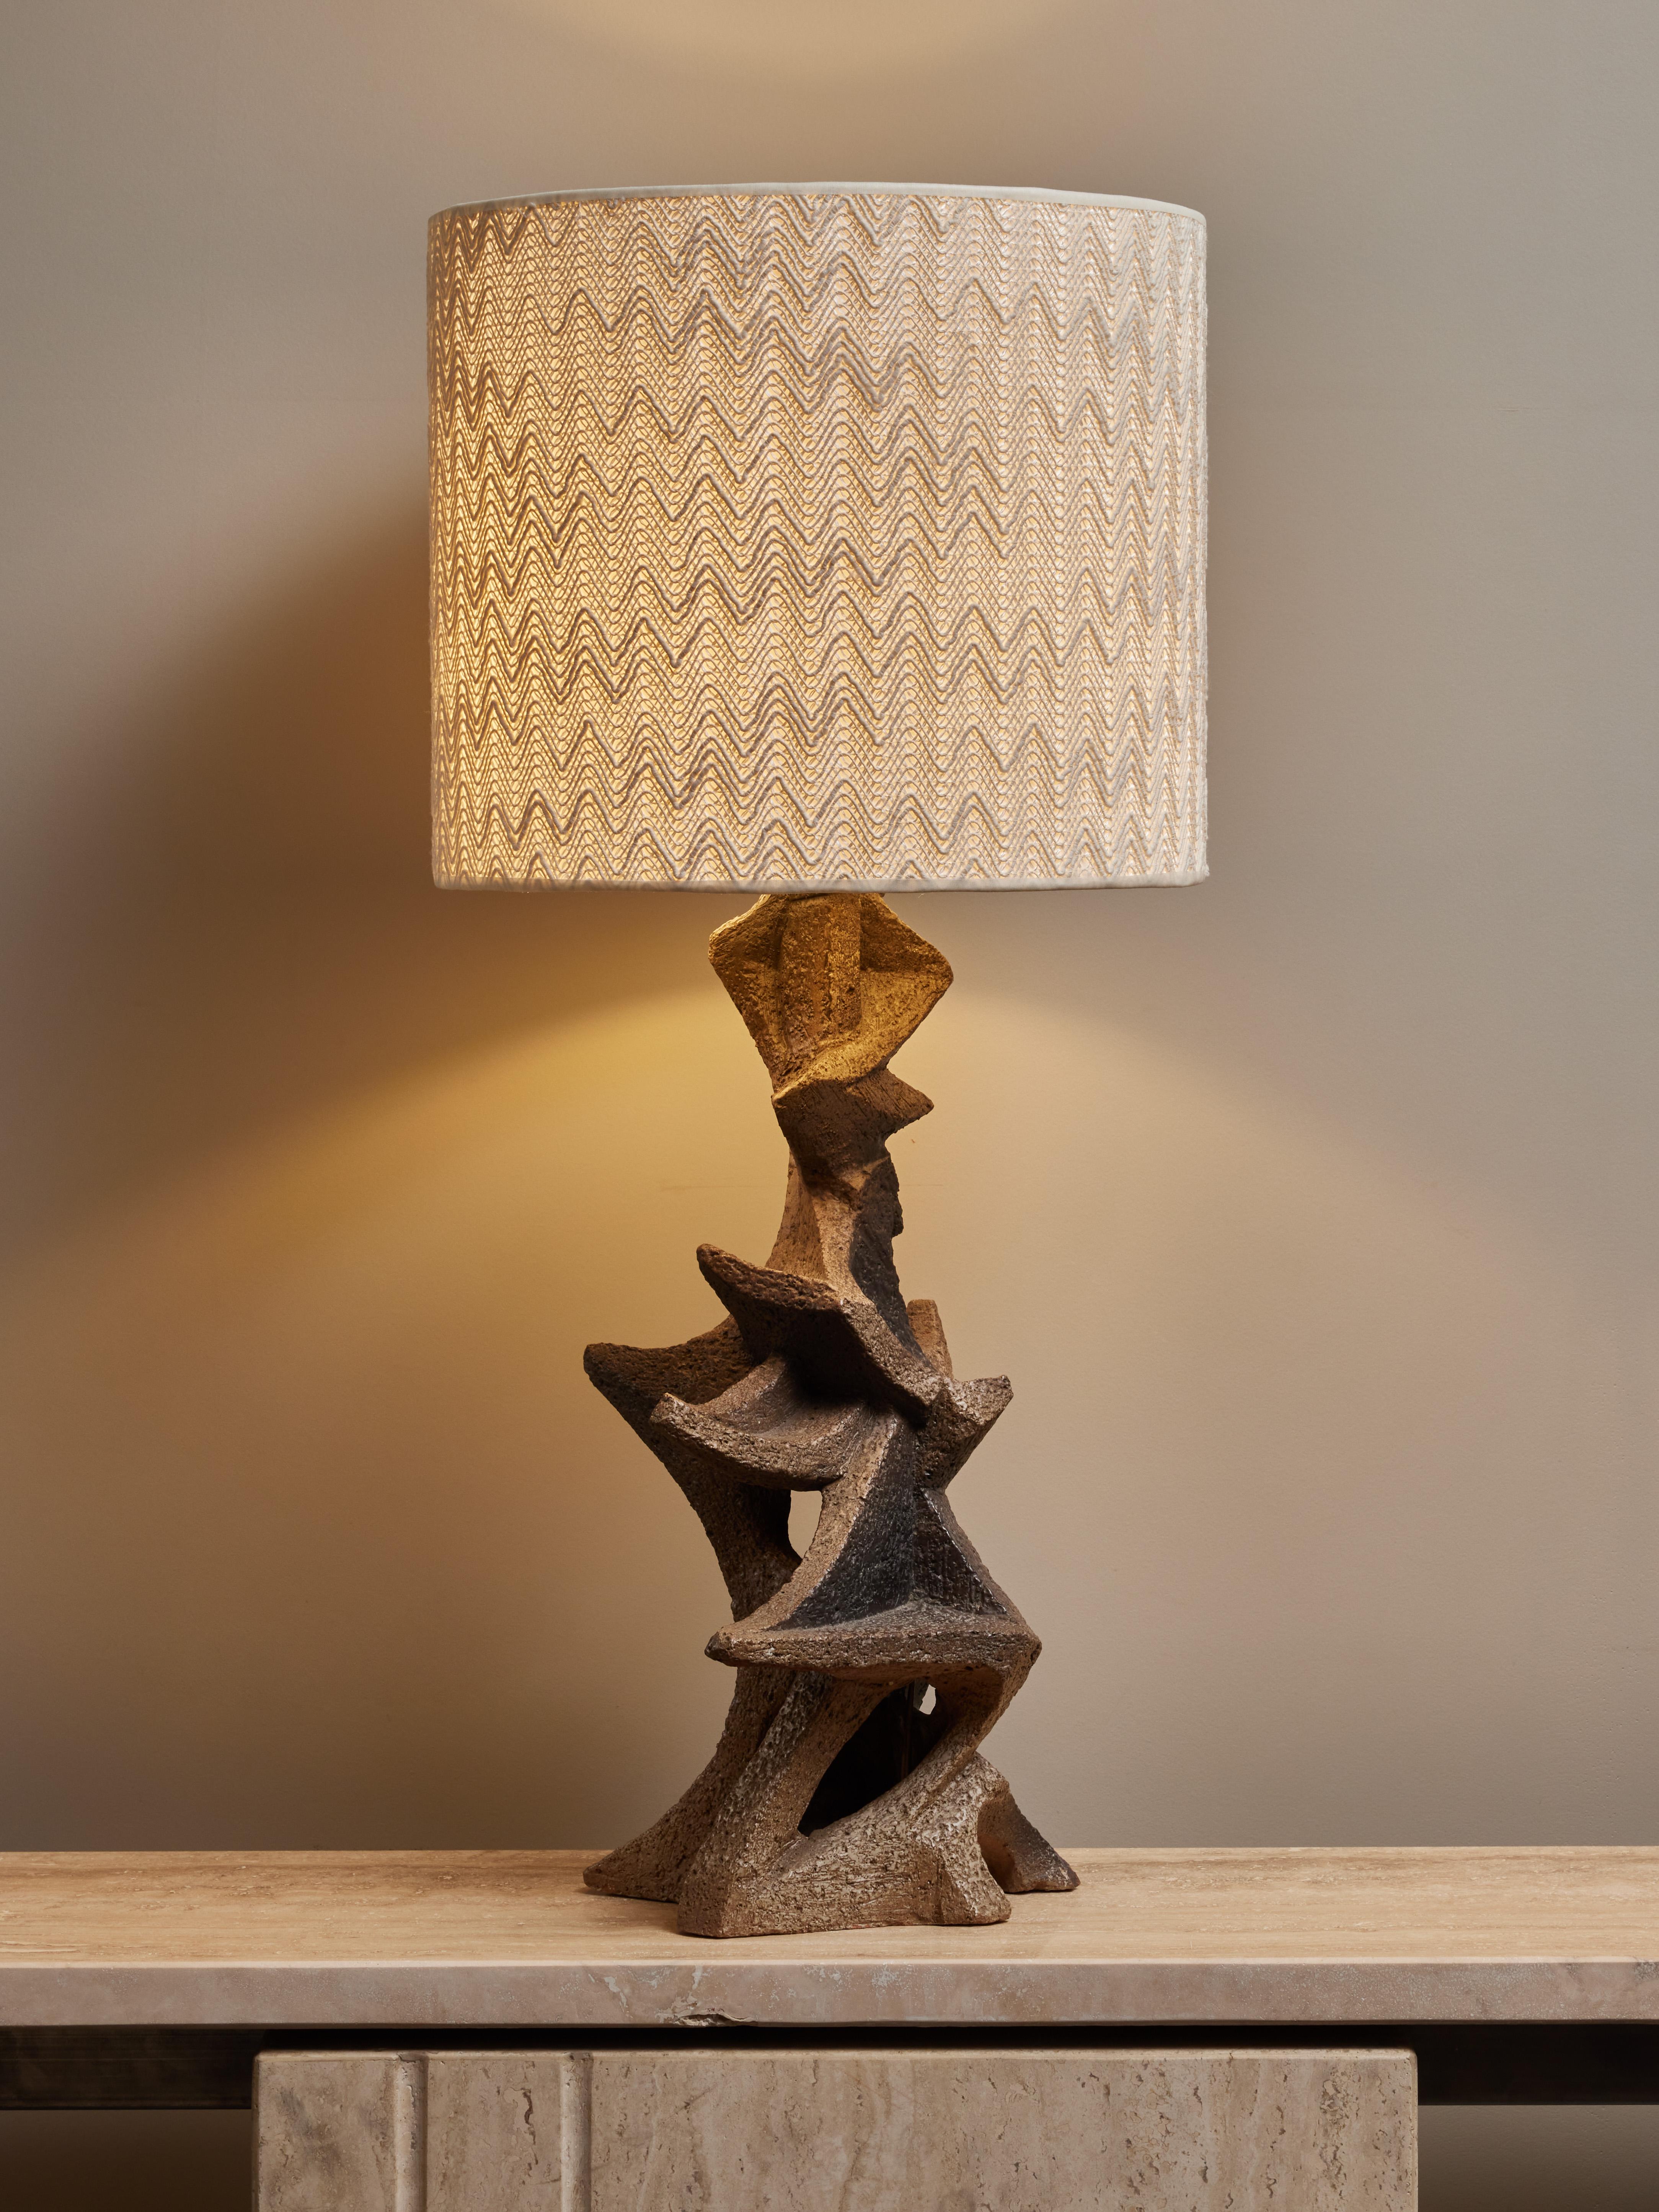 Ceramic table lamp made by the french artist Marius Bessone.

Topped with a modern shade

MARIUS BESSONE - Born in 1929
Marius Bessone was a renowned French ceramist who spent most of his life in the town of Vallauris, located in the south of